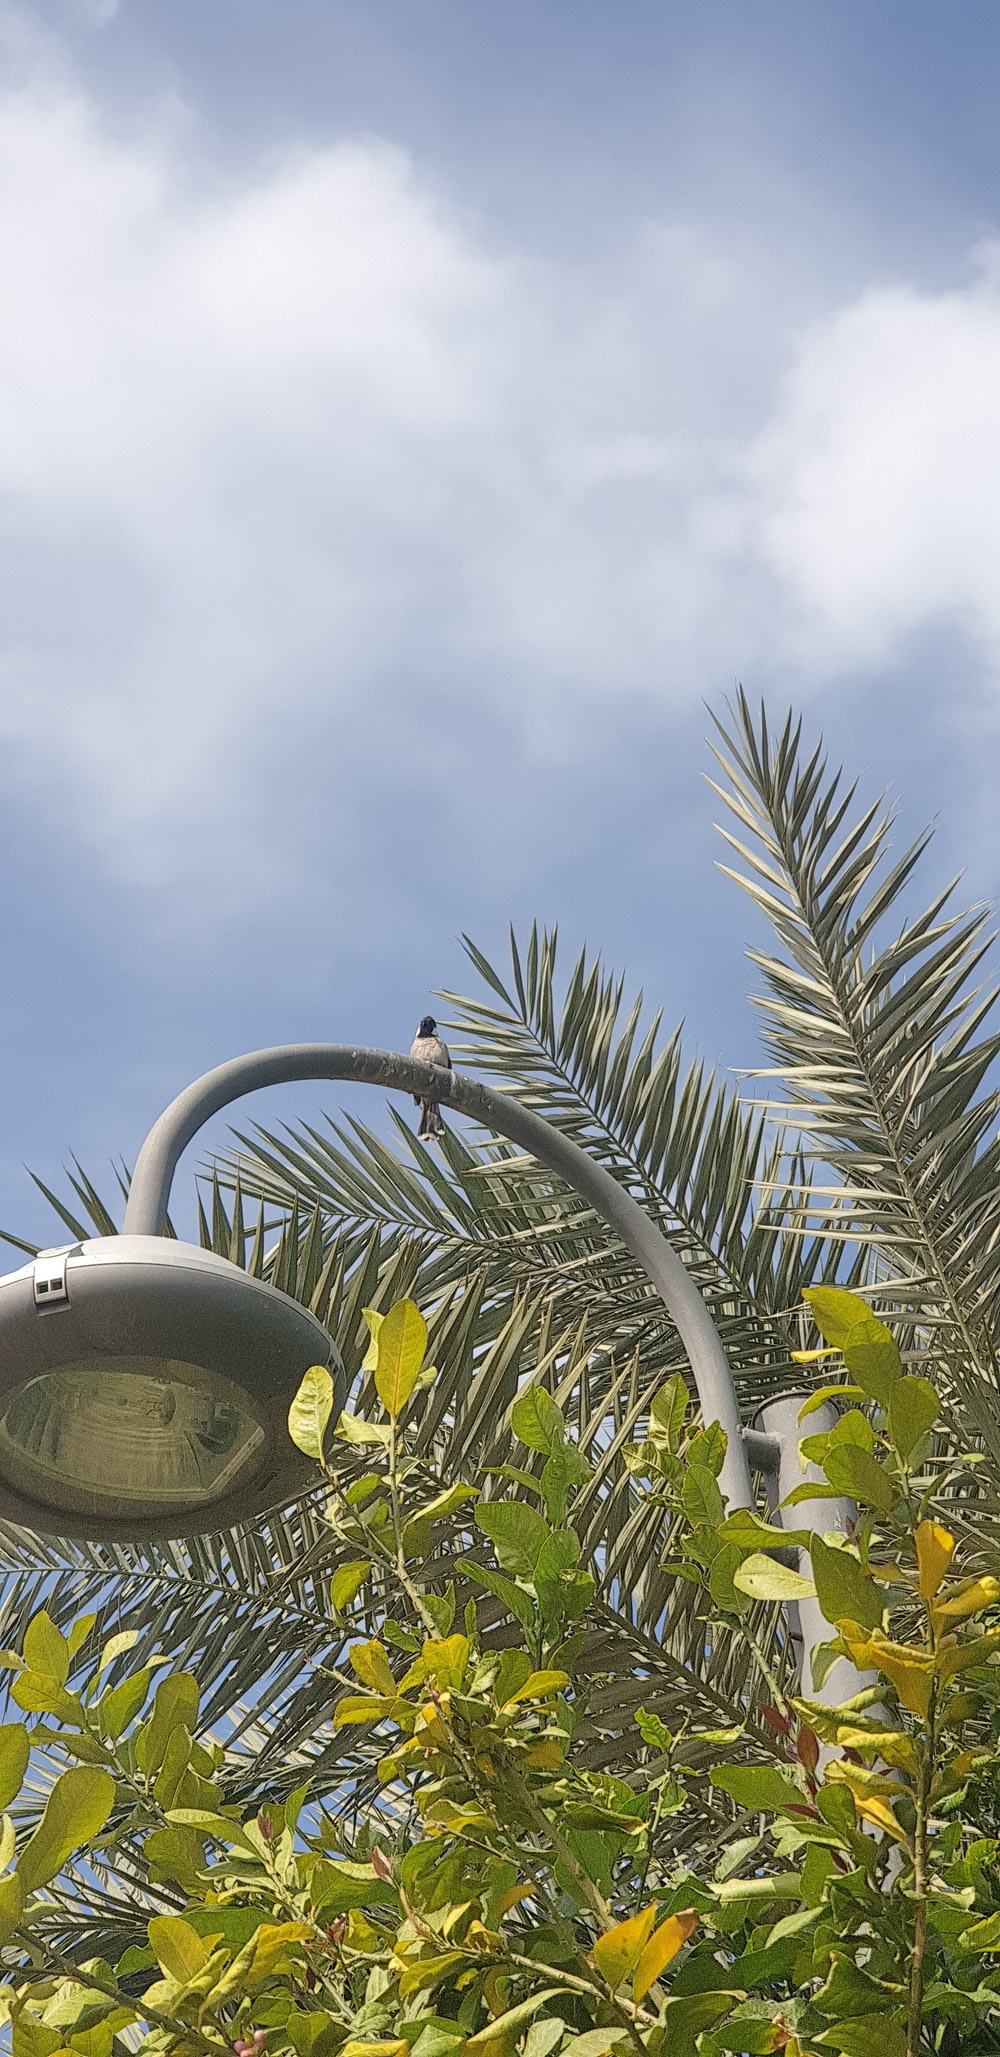 a street light hanging from the side of a palm tree